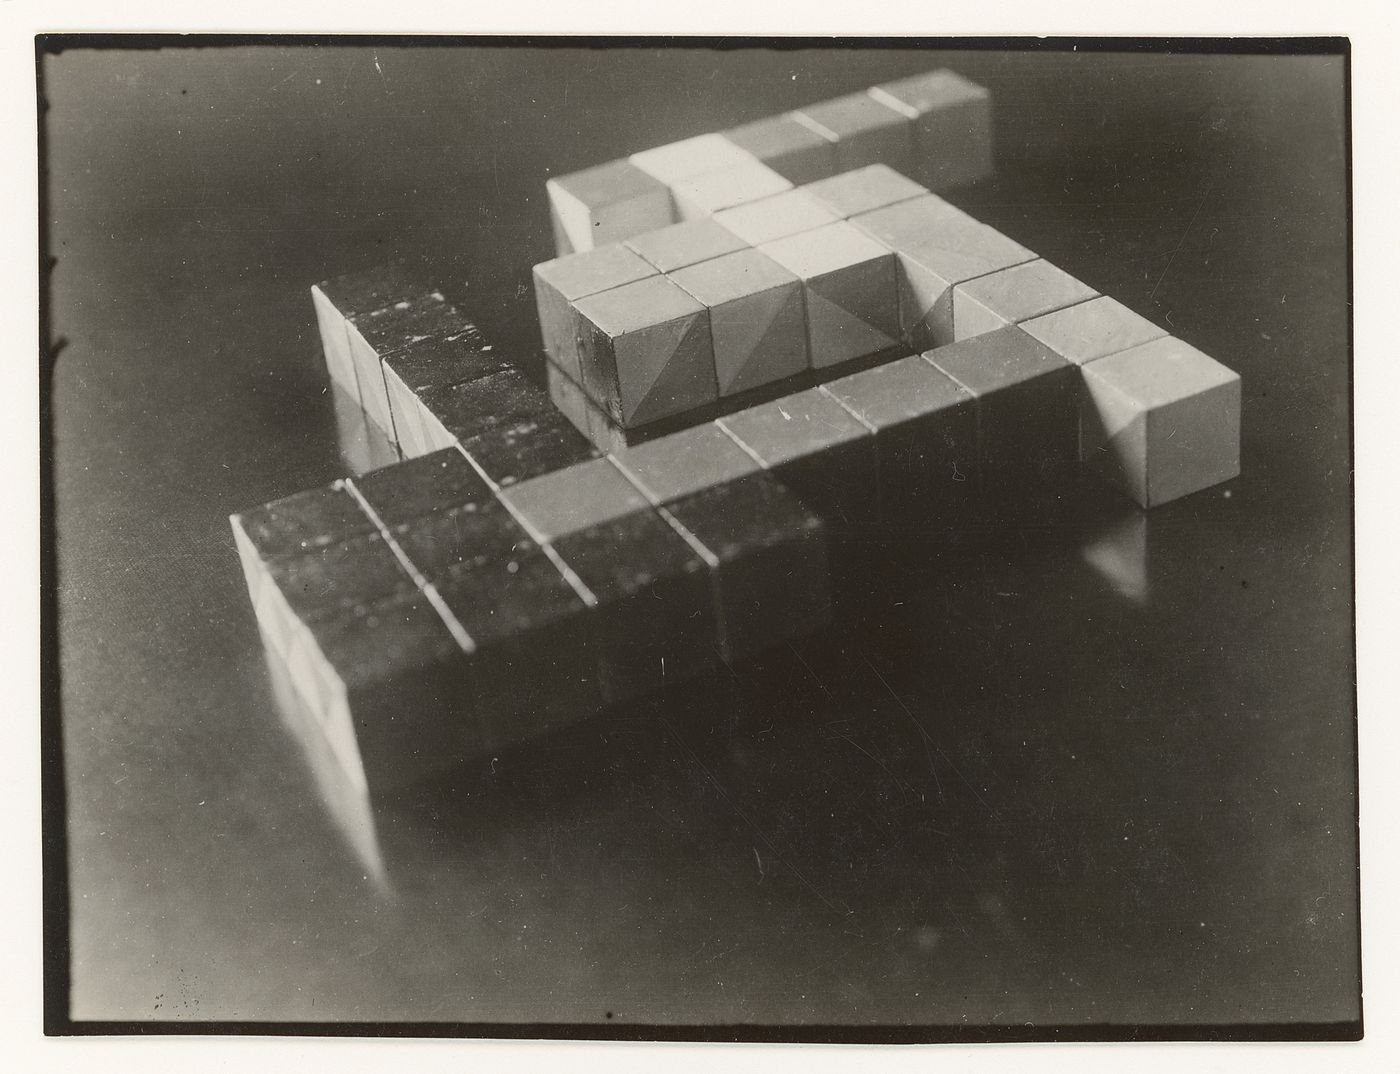 Abstract composition of cubical blocks